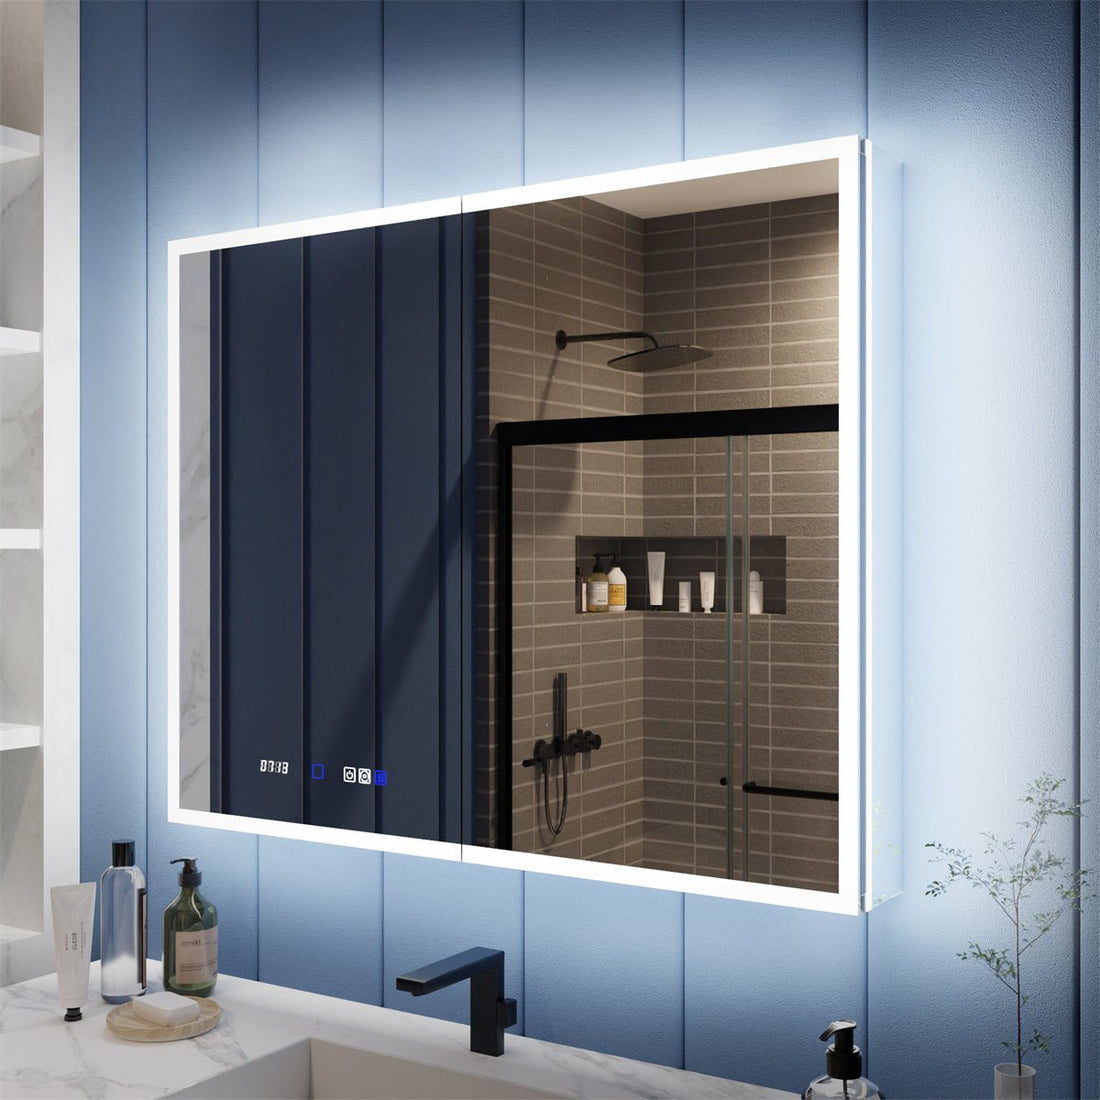 Allsumhome-Medicine Cabinets with Mirrors: Add Style and Functionality to Your Bathroom